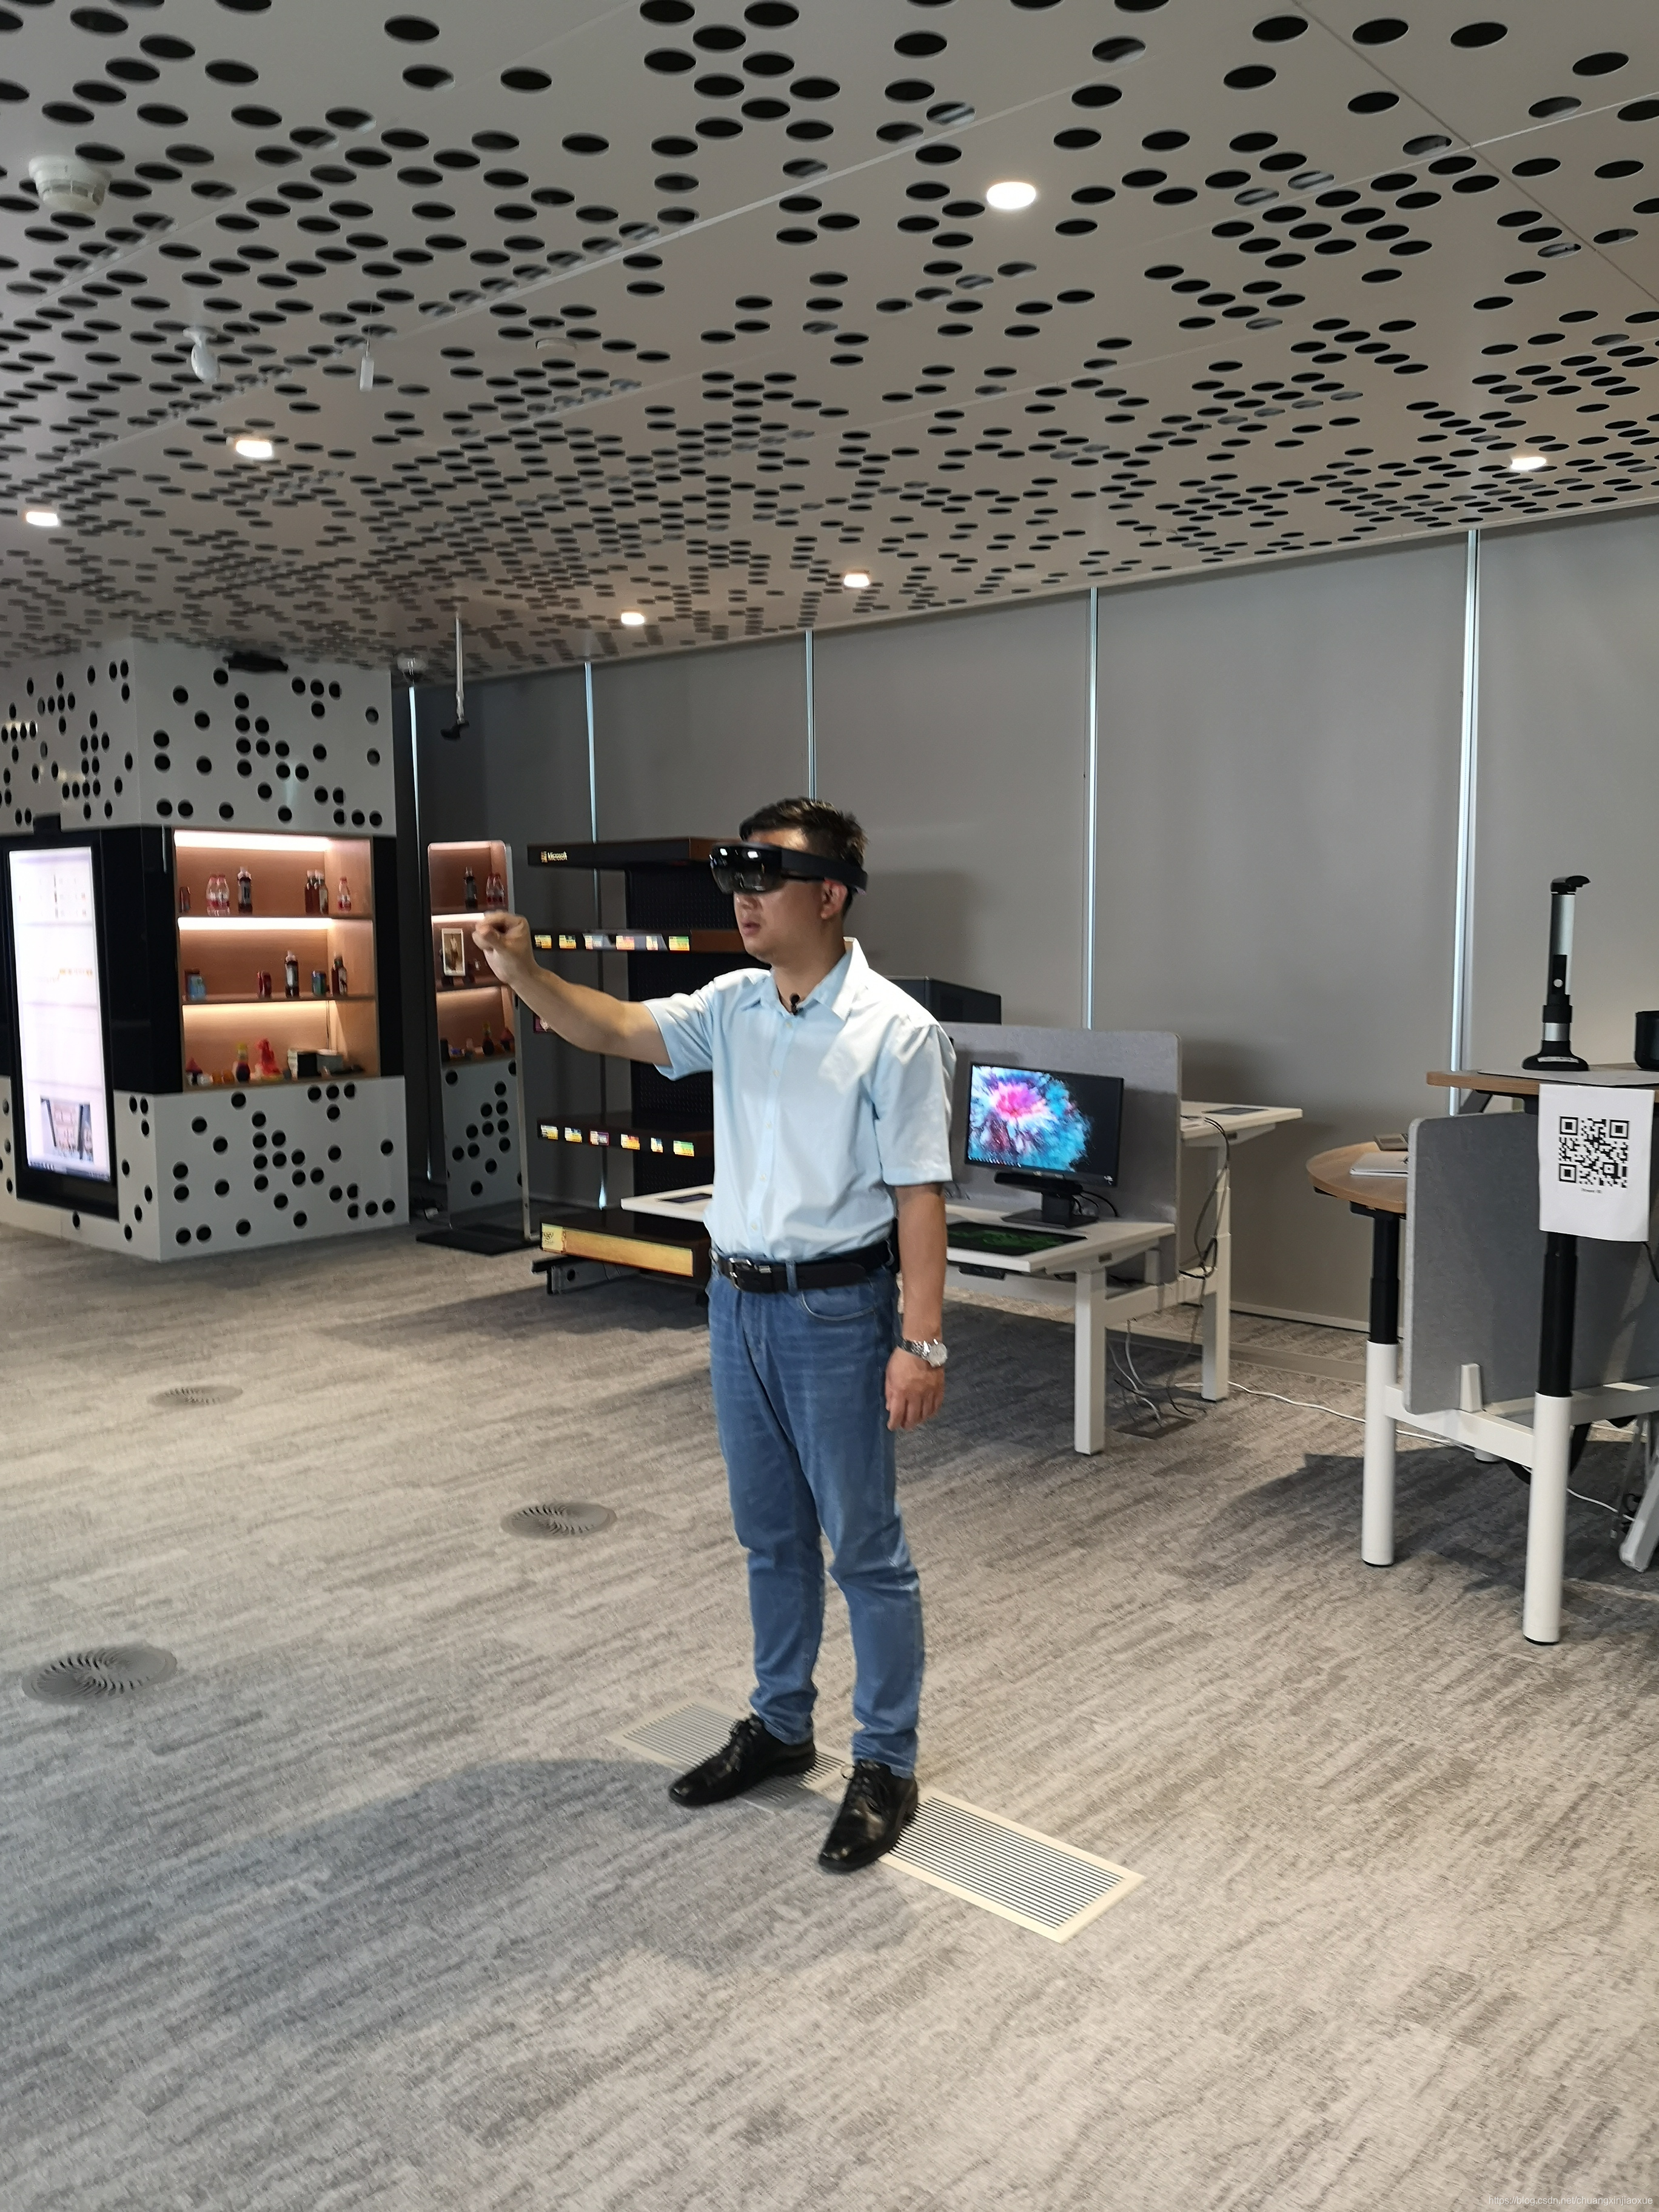 Filming of Microsoft China's Promotional Film The Application of Hololens in Education